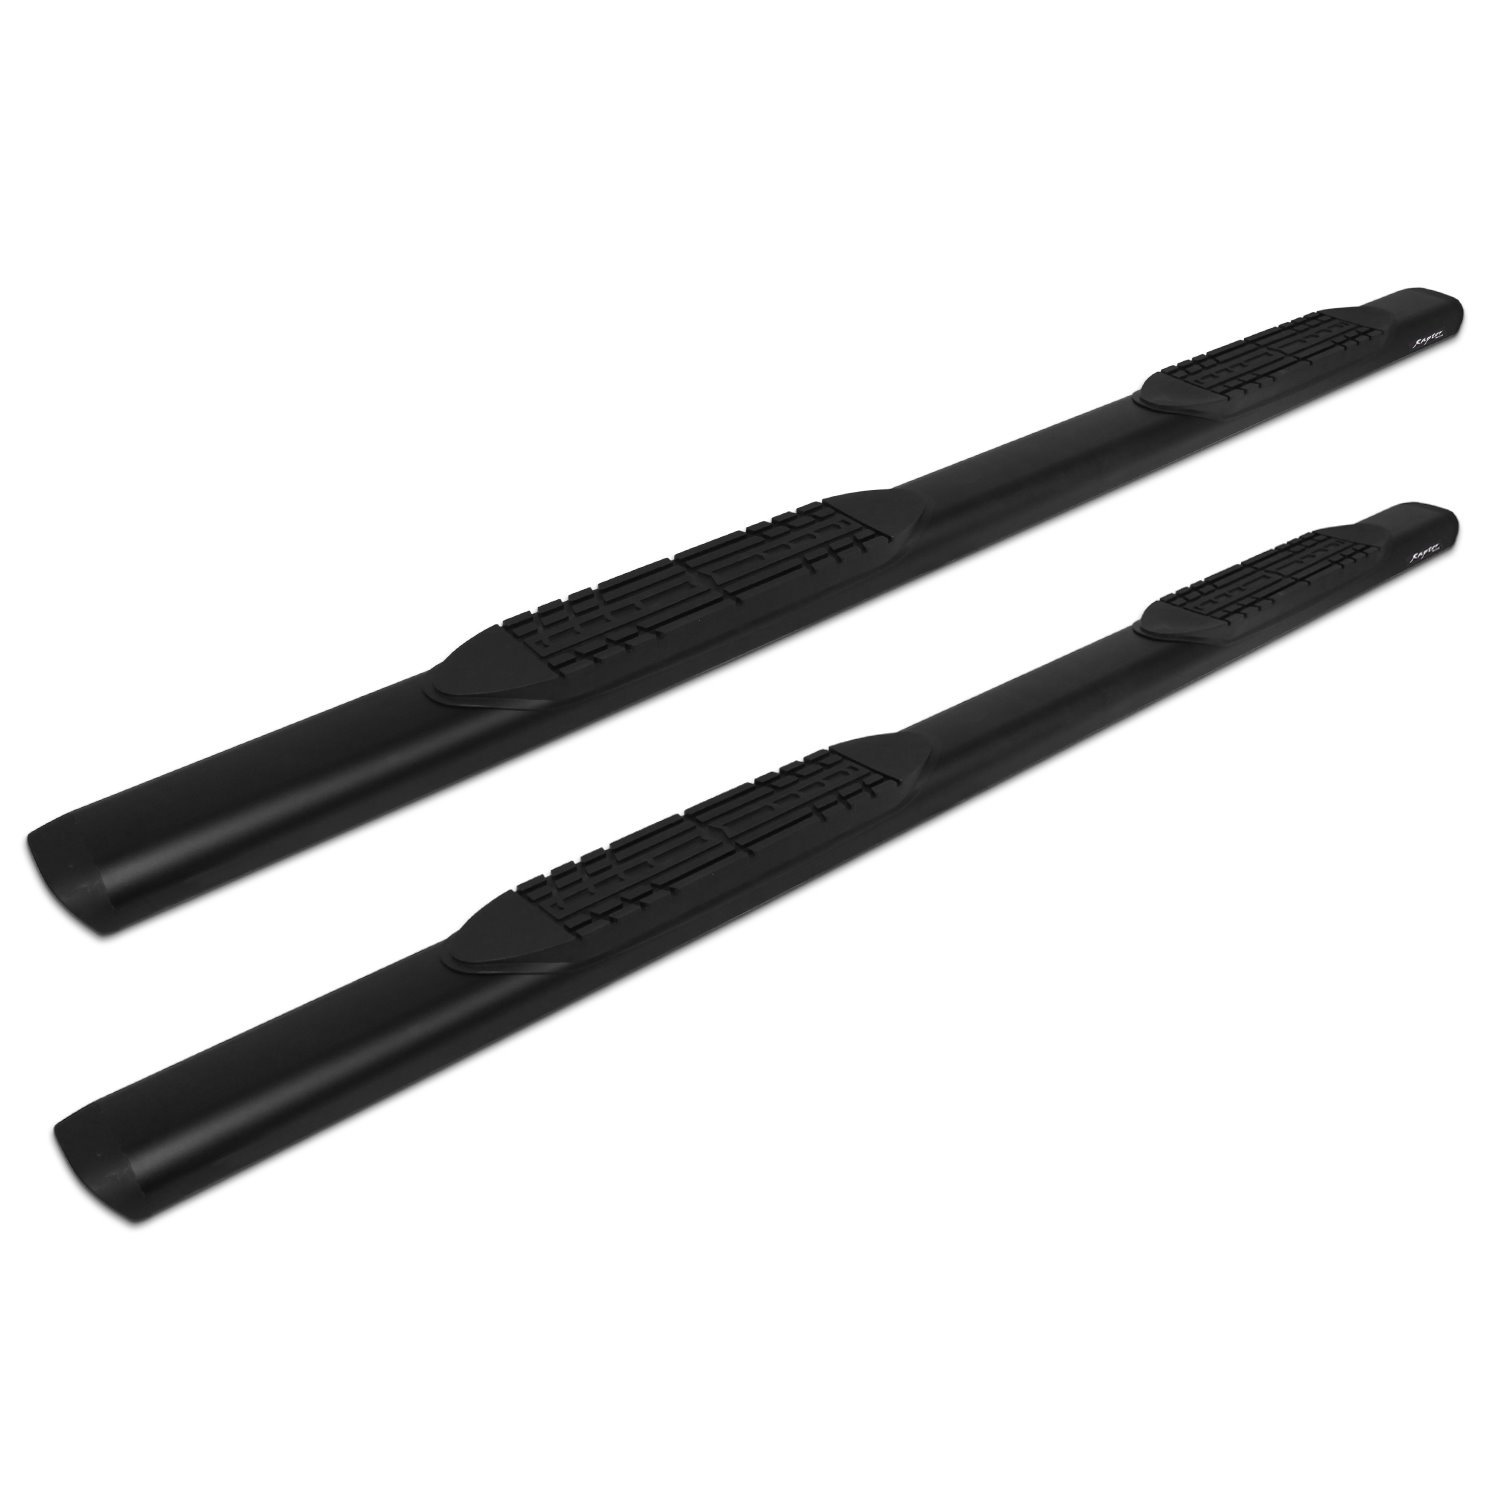 2002-0501BT 5 in Oval Style Slide Track Running Boards, Black Aluminum, Fits Select Dodge Ram 1500 New Body Style